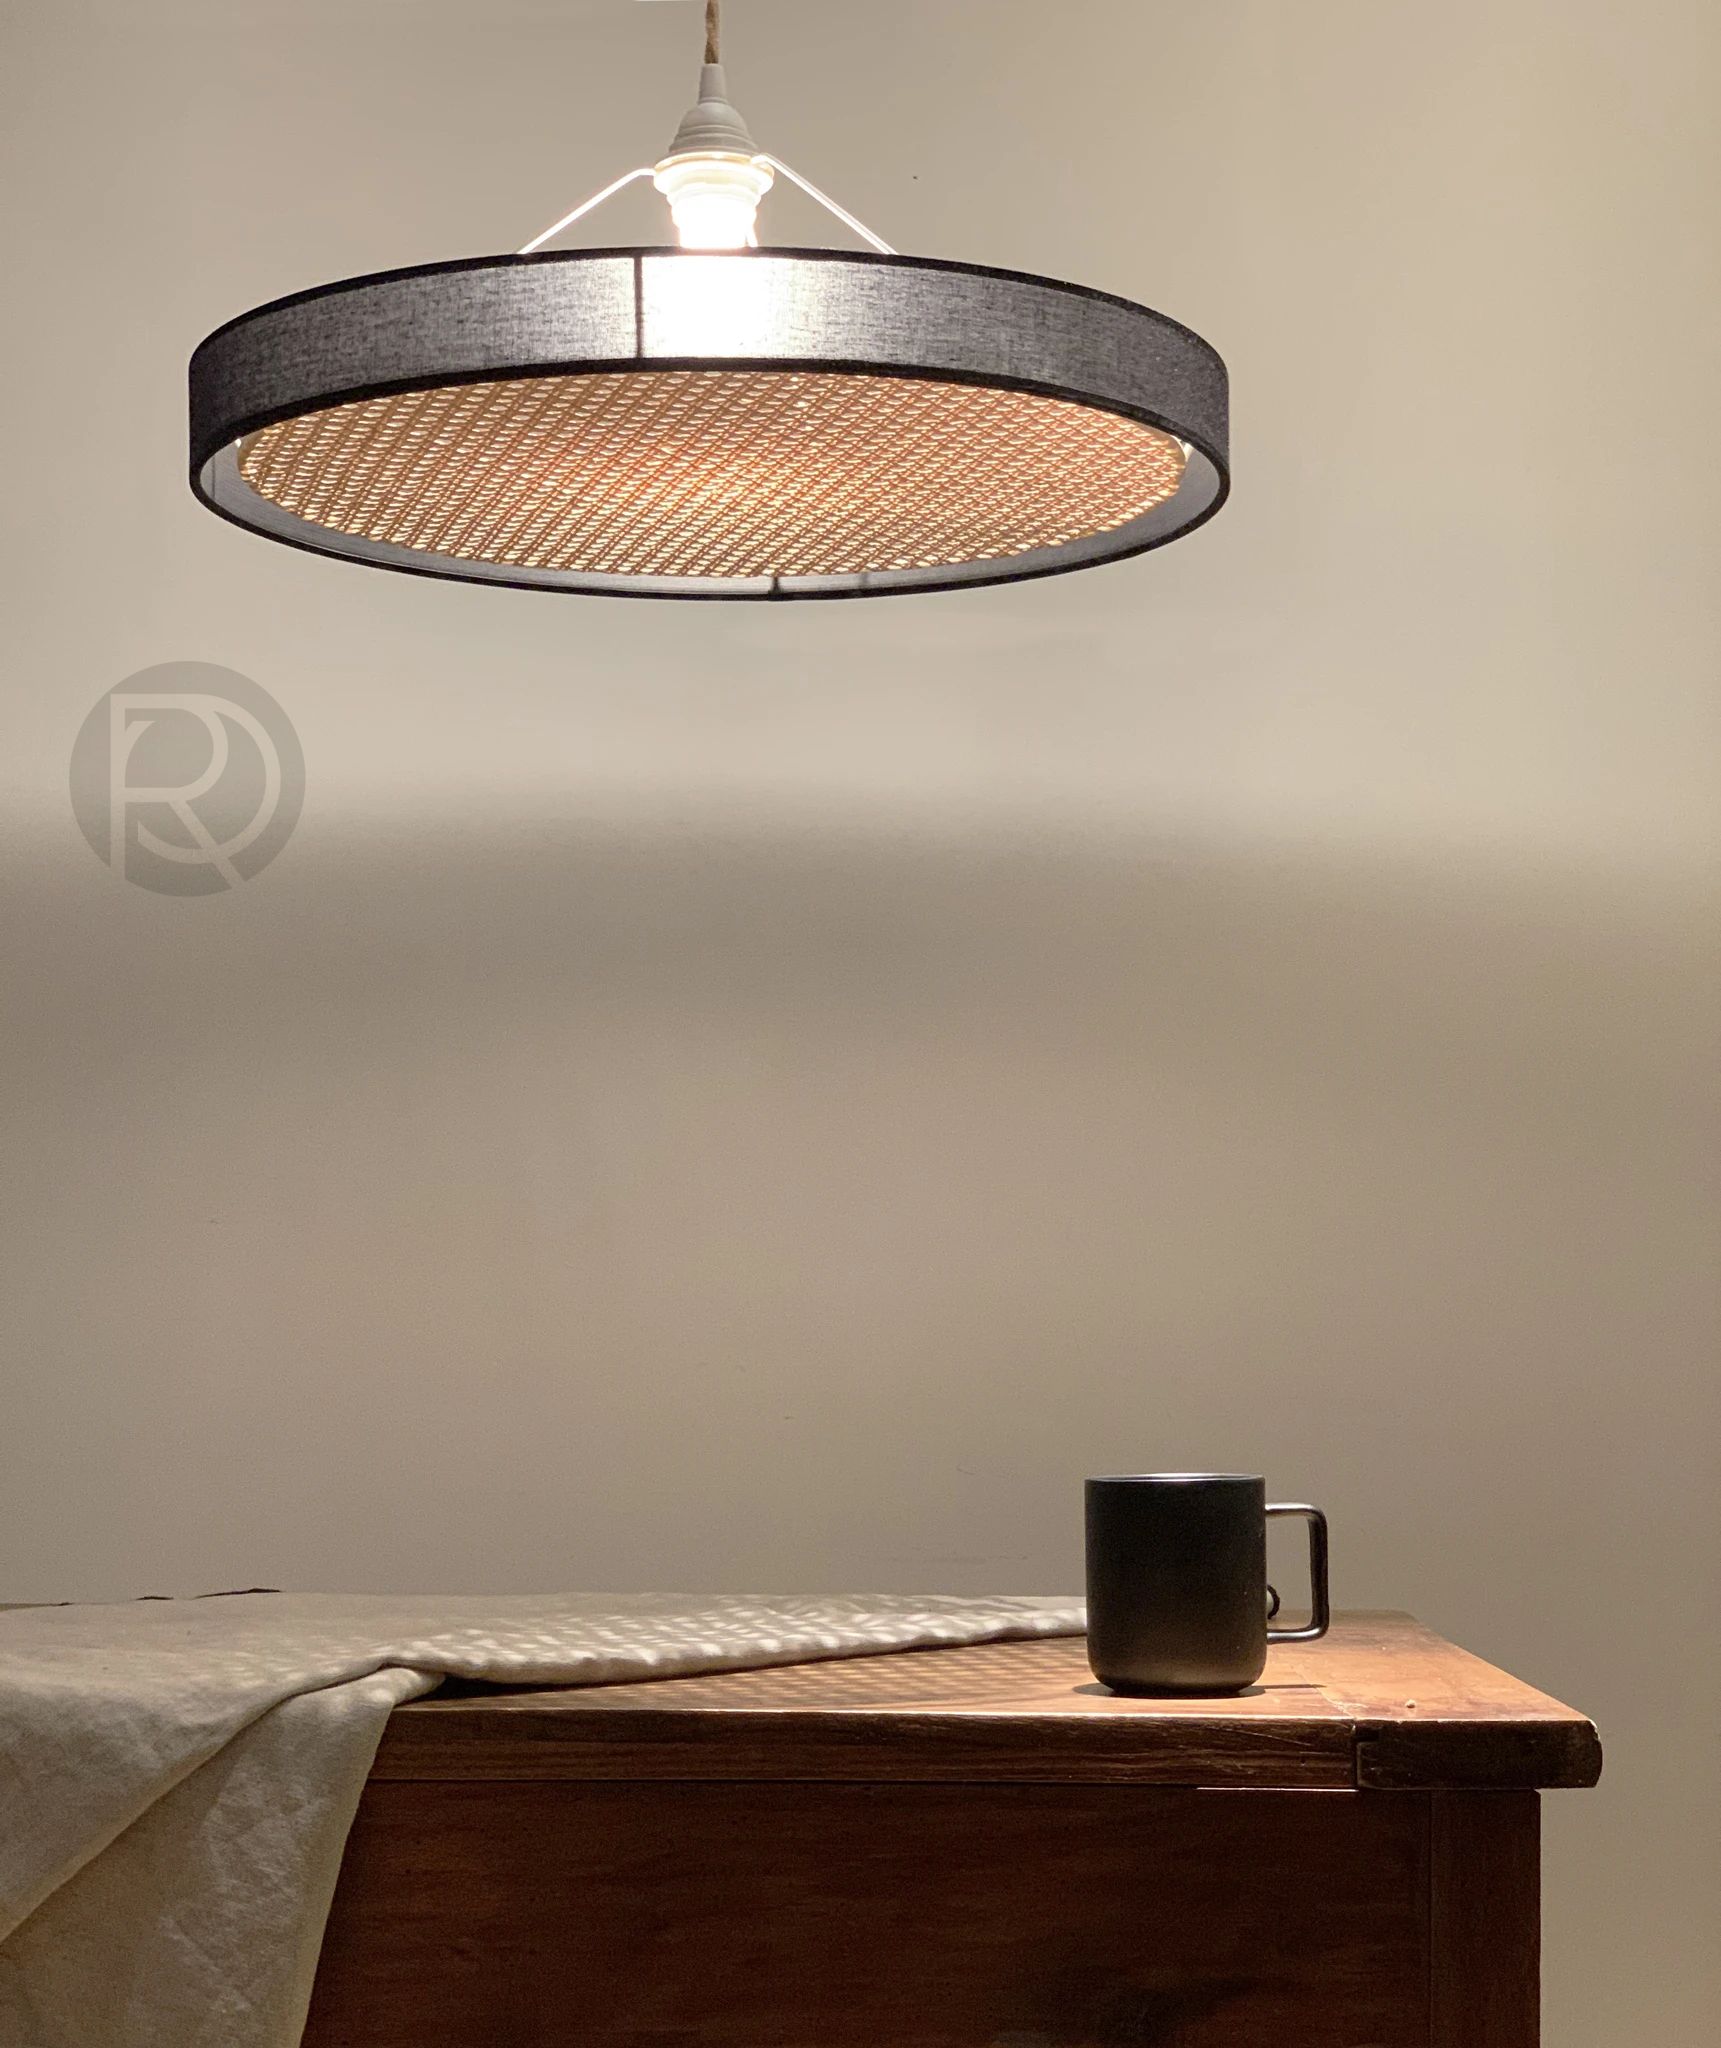 Pendant lamp ECLIPSE by An°so